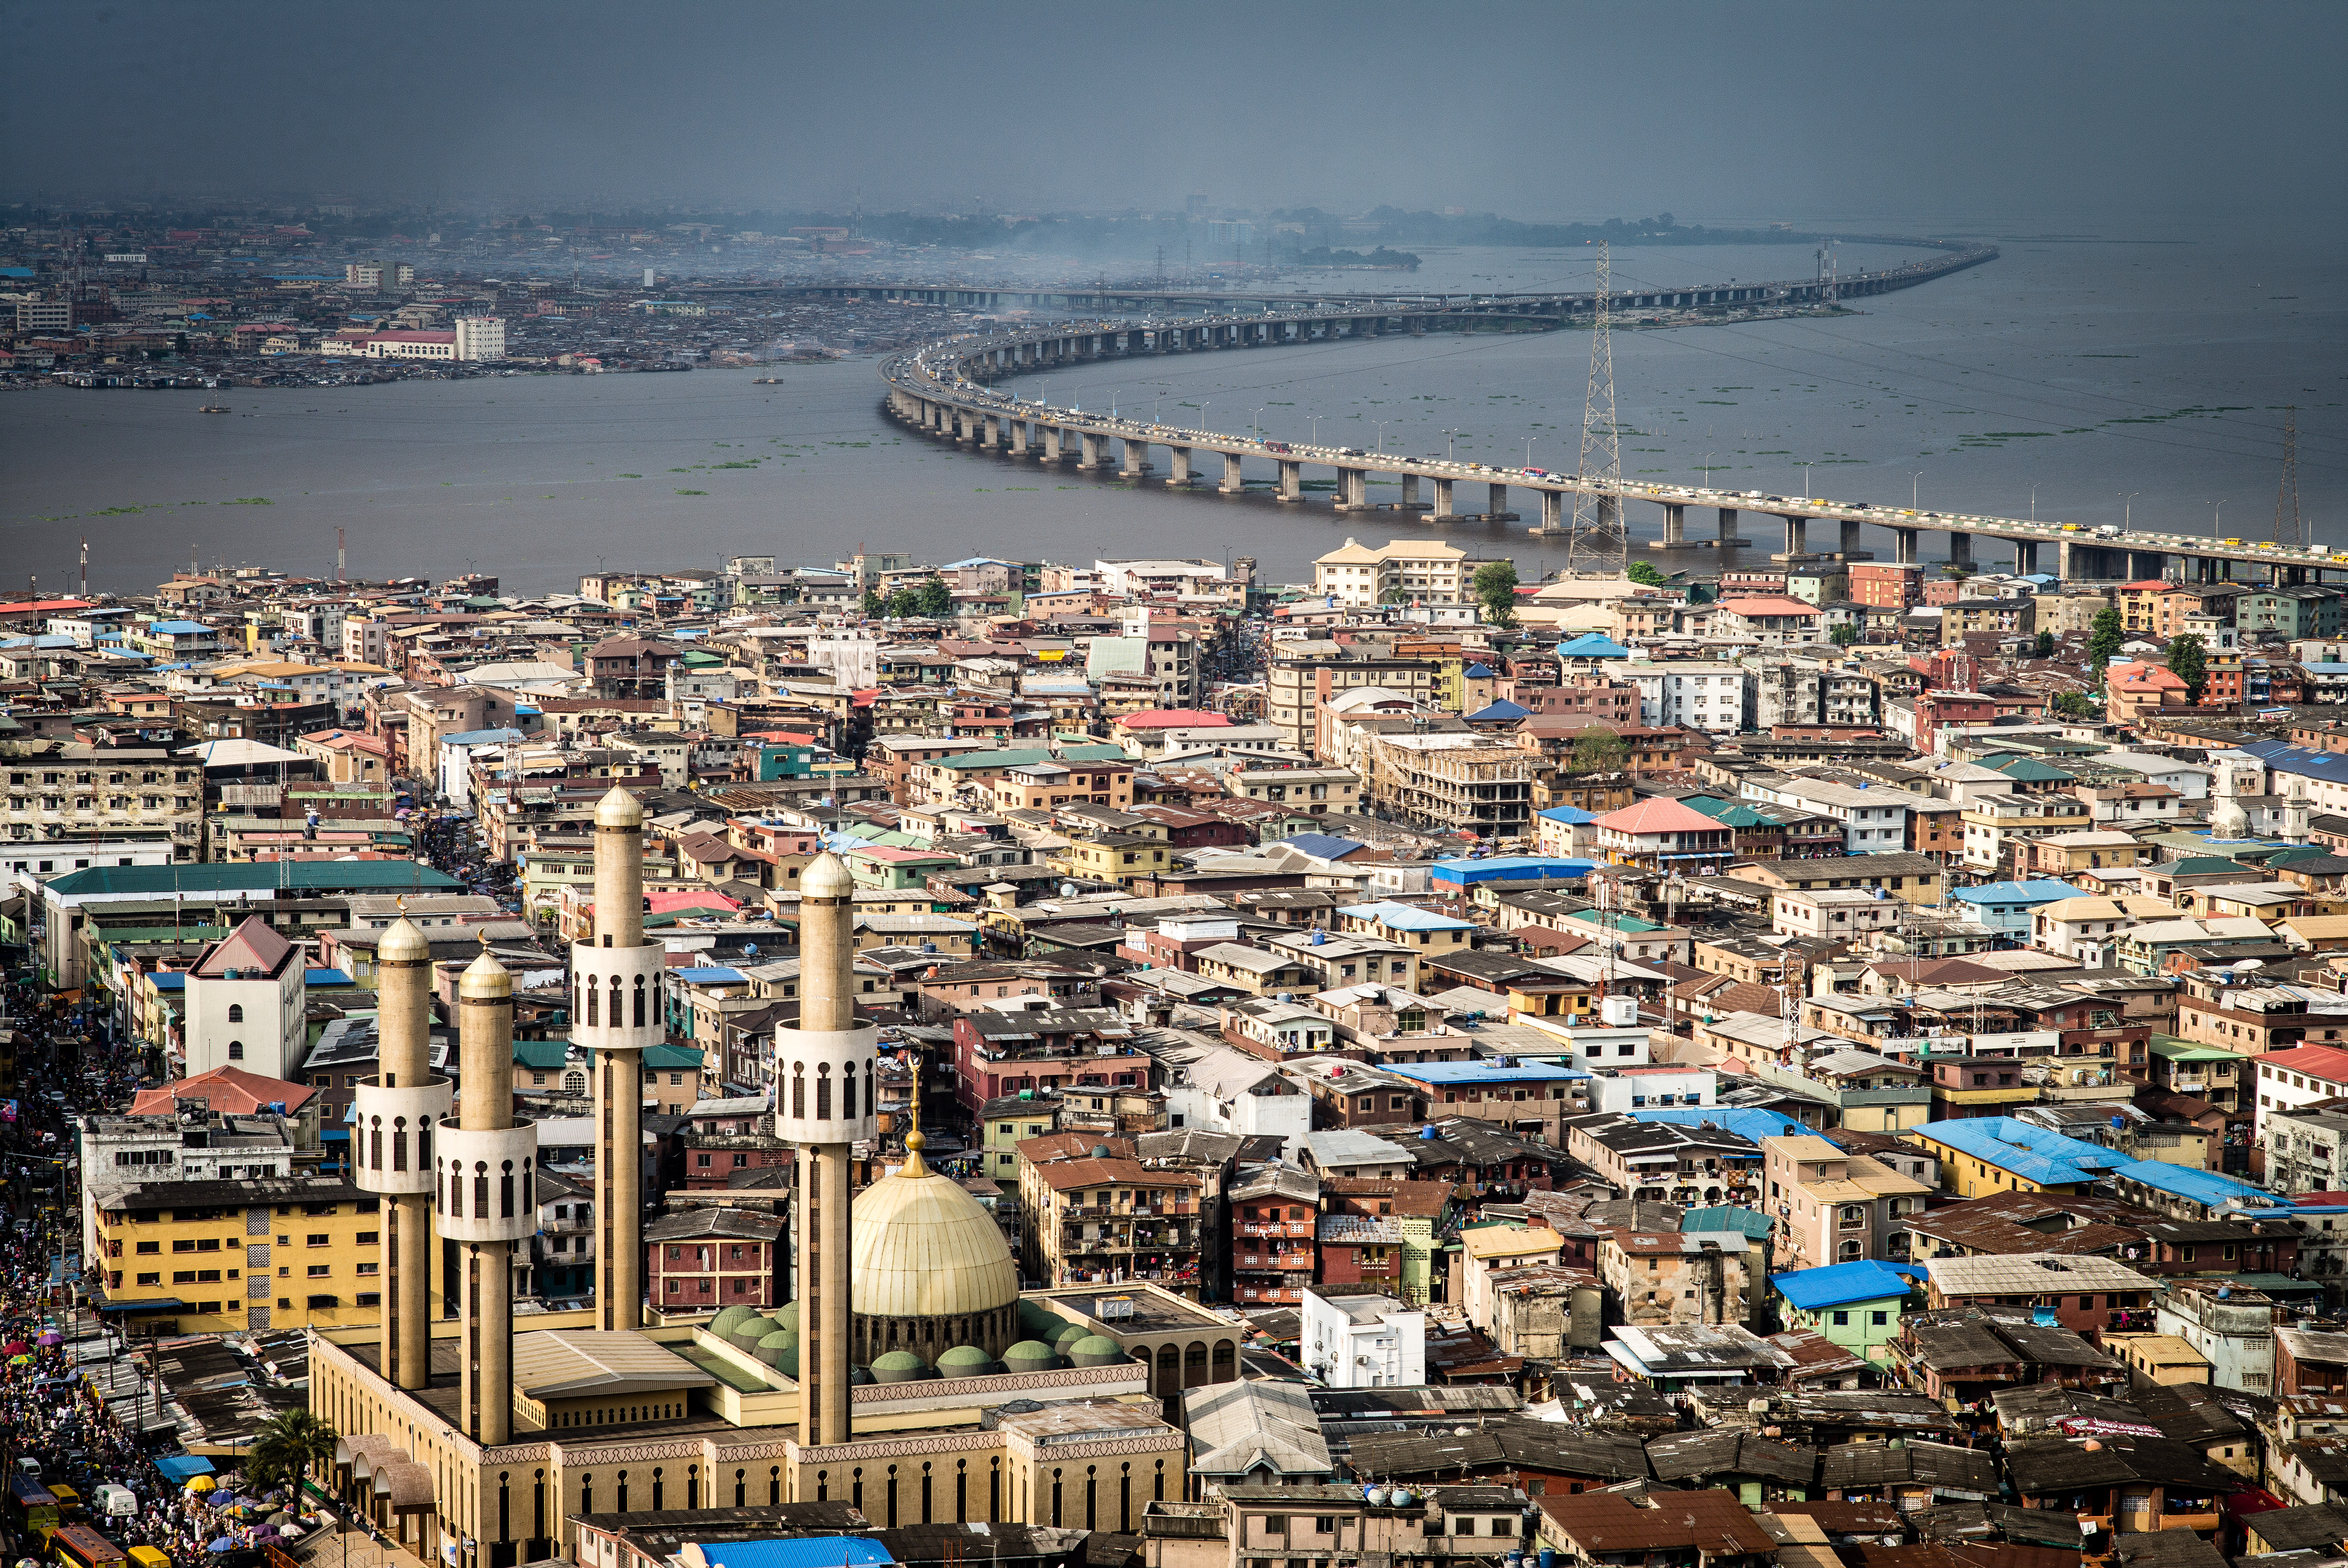 Nigeria, Africa’s biggest economy, is a key focus for commodities trade in West Africa, but Gregoire cultivates contacts and business relationships all across the region, including Mali, Senegal, Ghana, Ivory Coast, Mauritania, Angola, Cameroon, and others. 